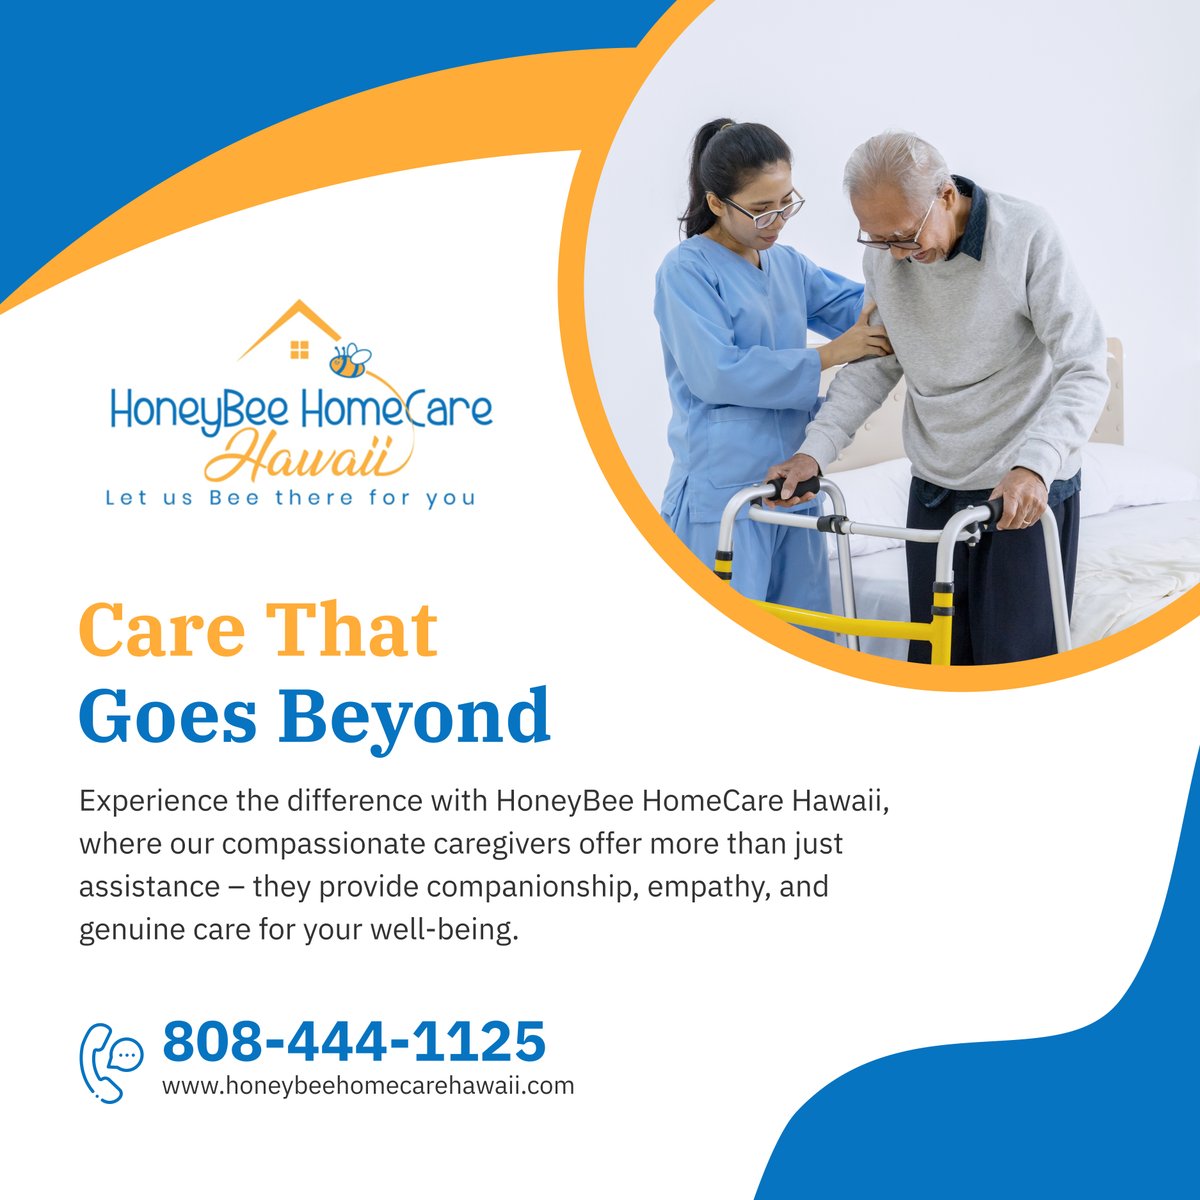 Discover the heartfelt difference of care with HoneyBee HomeCare Hawaii, where our caregivers go above and beyond to ensure your comfort and happiness at home. 

#HonoluluHI #HomeCare #CompassionateCare